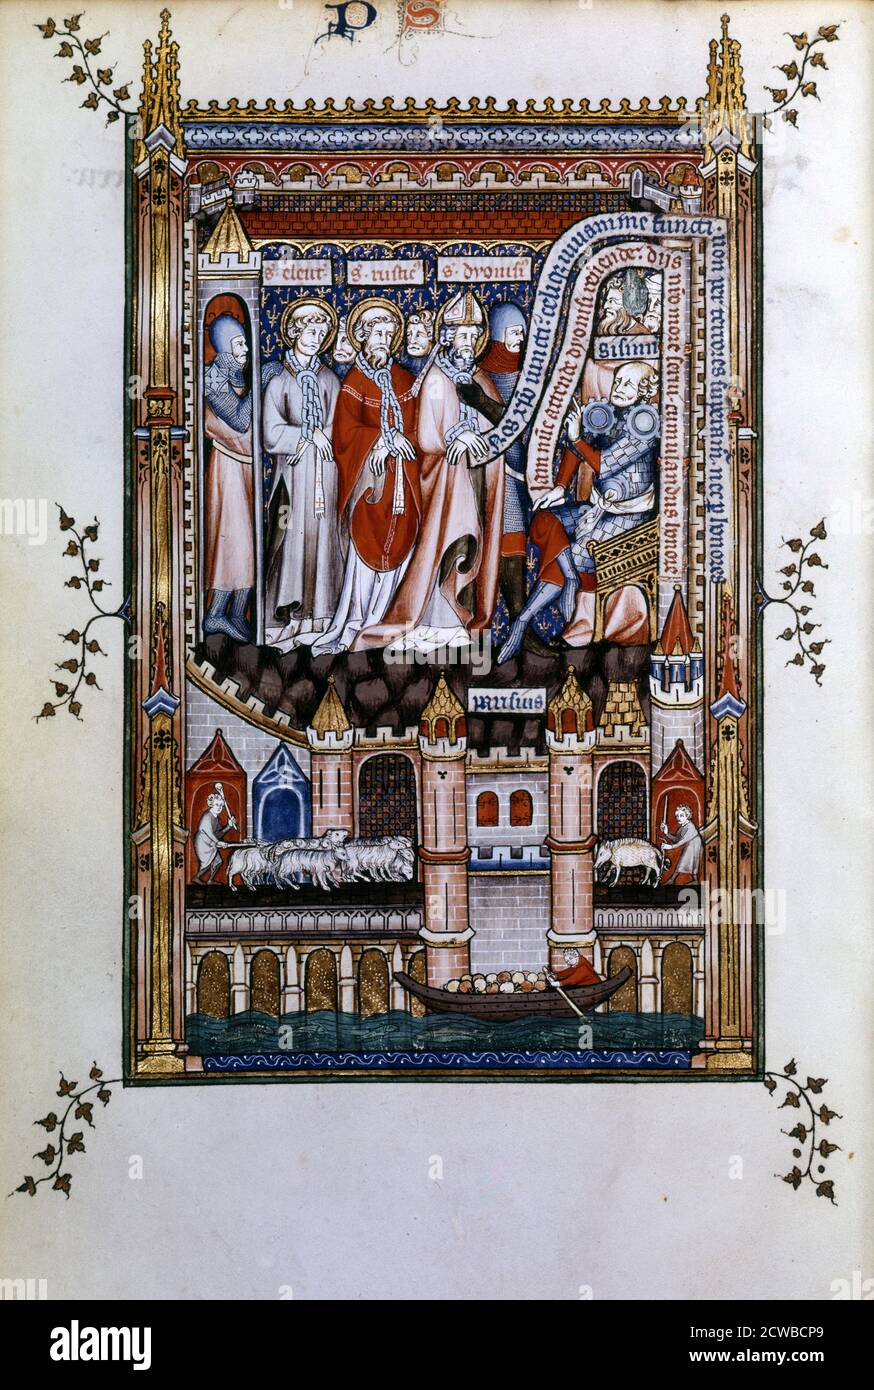 Sisinnius exhorts St Denis to renounce his faith, 1317. St Denis, St Eleutherius and St Rusticus, in chains, stand before Sisinnius who attempts to order them to repudiate Christianity. Manuscript illustration from a work on the life of St Denis (died c258 AD), written by Yves, a monk at the Abbey of St Denis. The book depicts the torture and martyrdom of the saint by the Roman governor Fescenninus Sisinnius. The lower scene depicts people on the bridge over the River Seine; showing a shepherd with his sheep, and a swineherd with hogs. From the collection of the Bibliotheque Nationale, Paris. Stock Photo